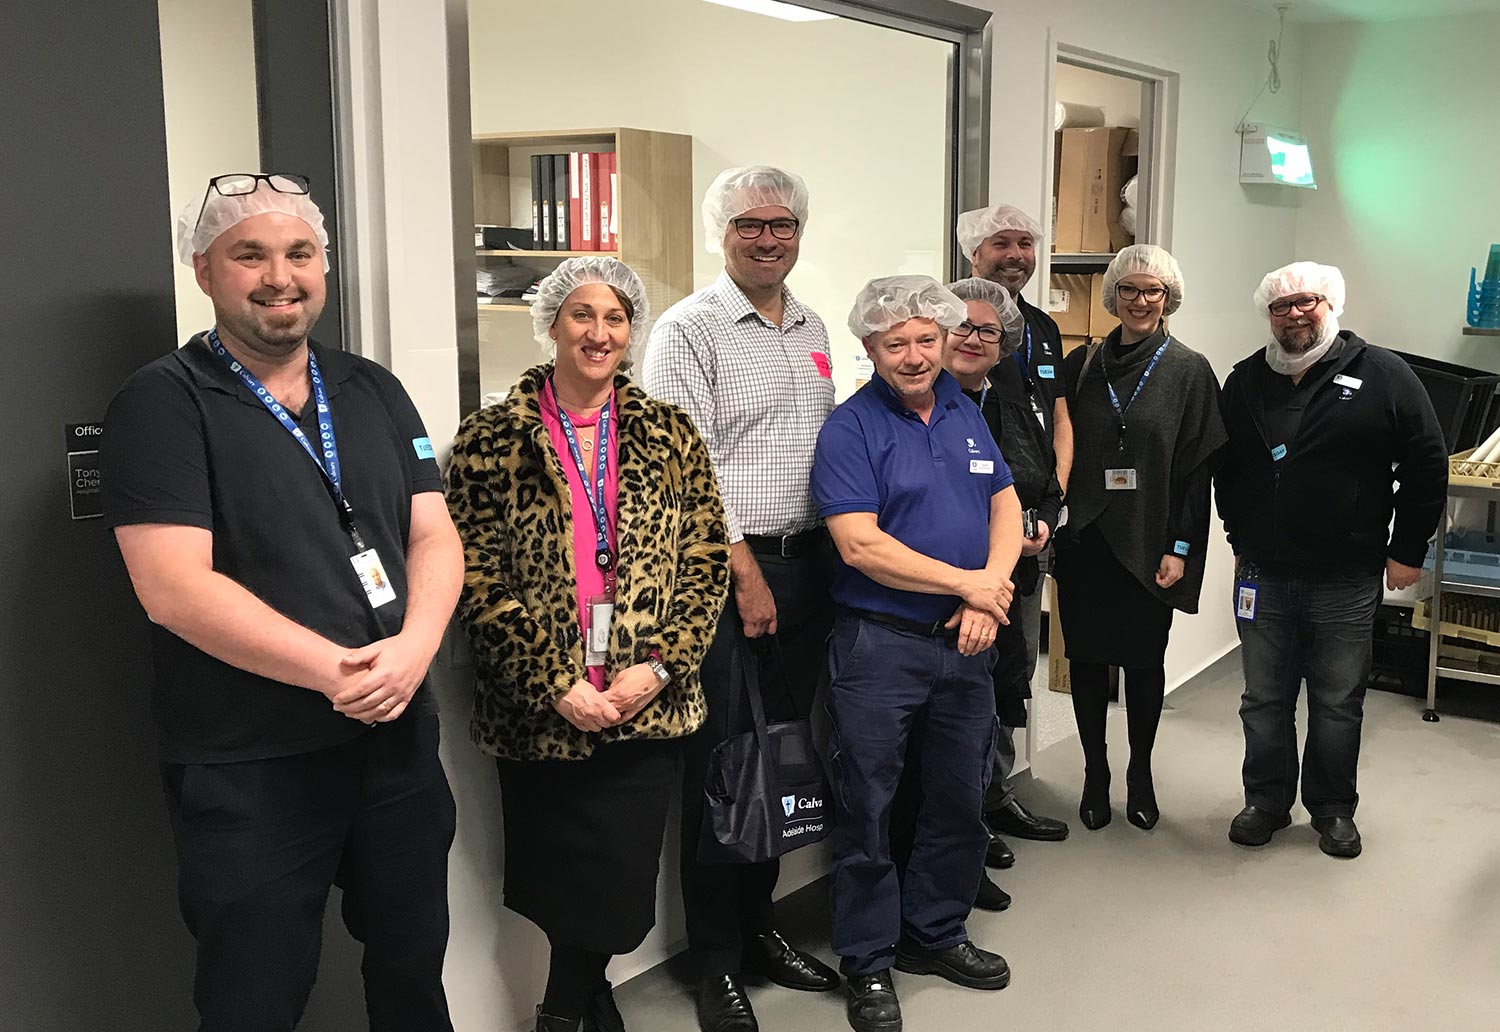 Detmold Group are hosted by Calvary Health Care’s SA Regional CEO Sharon Kendall, SA Regional Business Development Manager Simone Hogarth and General Manager of Adelaide Calvary Hospital Tanya Brooks